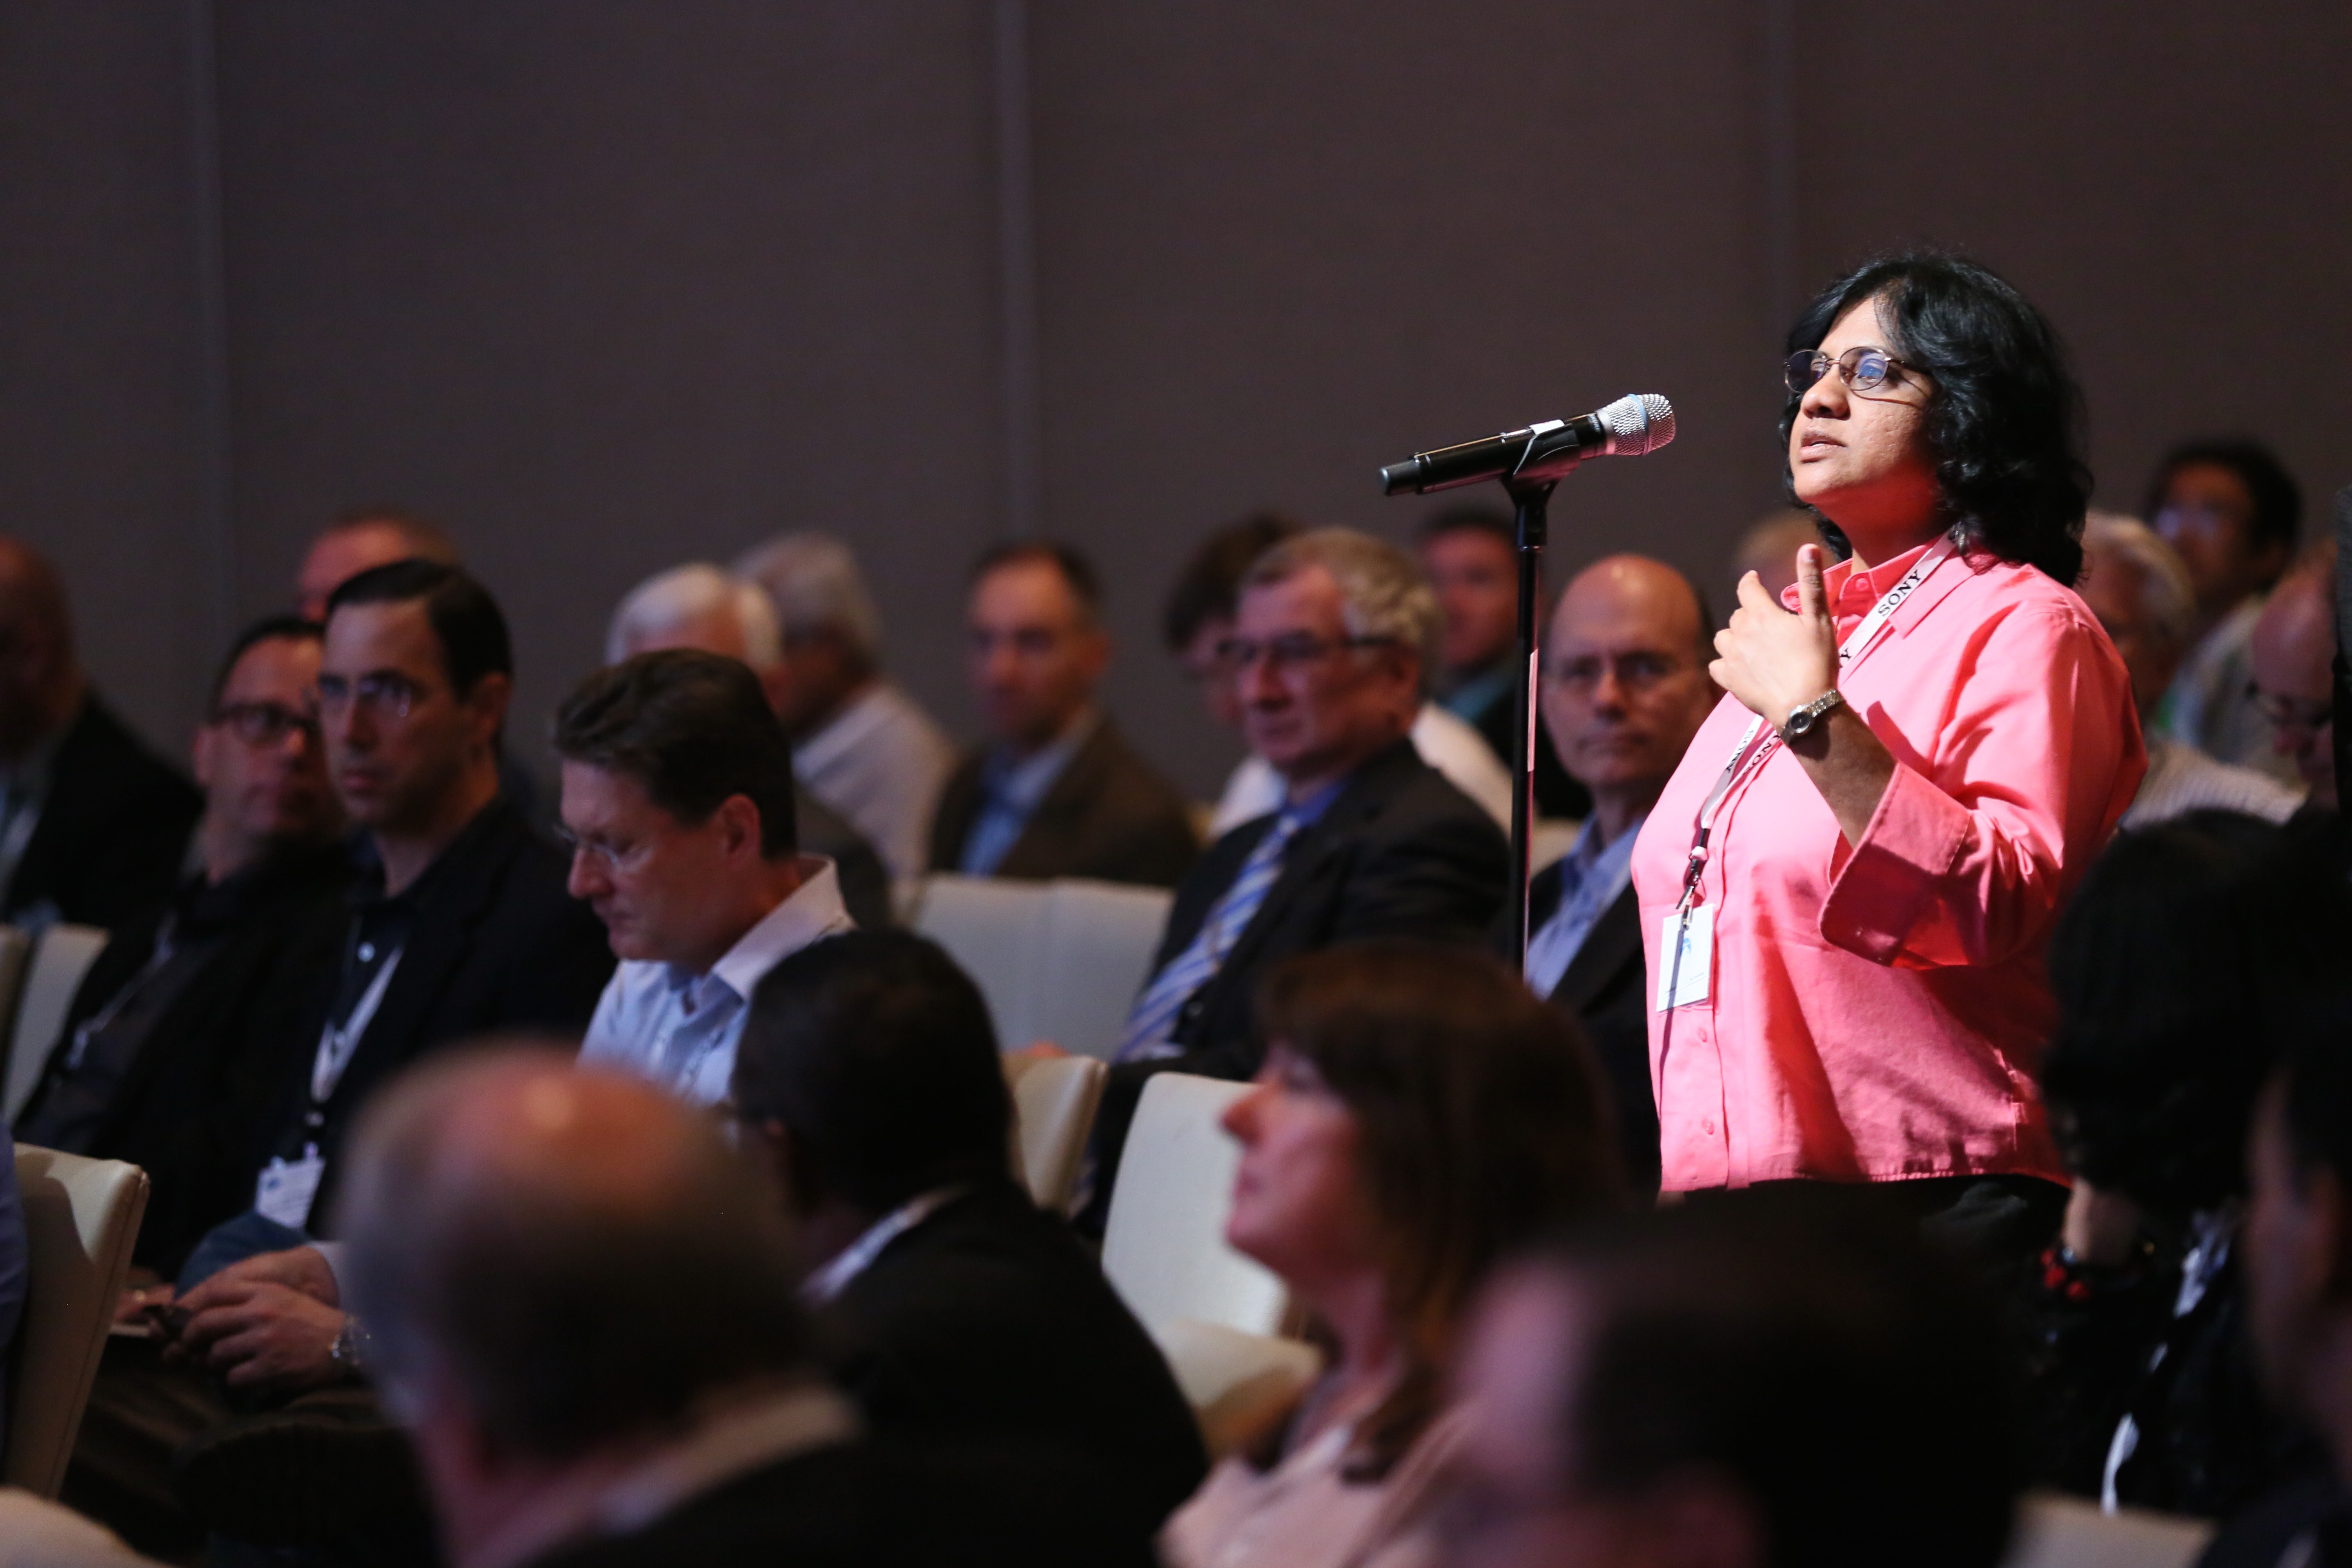 SMPTE 2015 Attendee asks a question during a Technical Conference Session